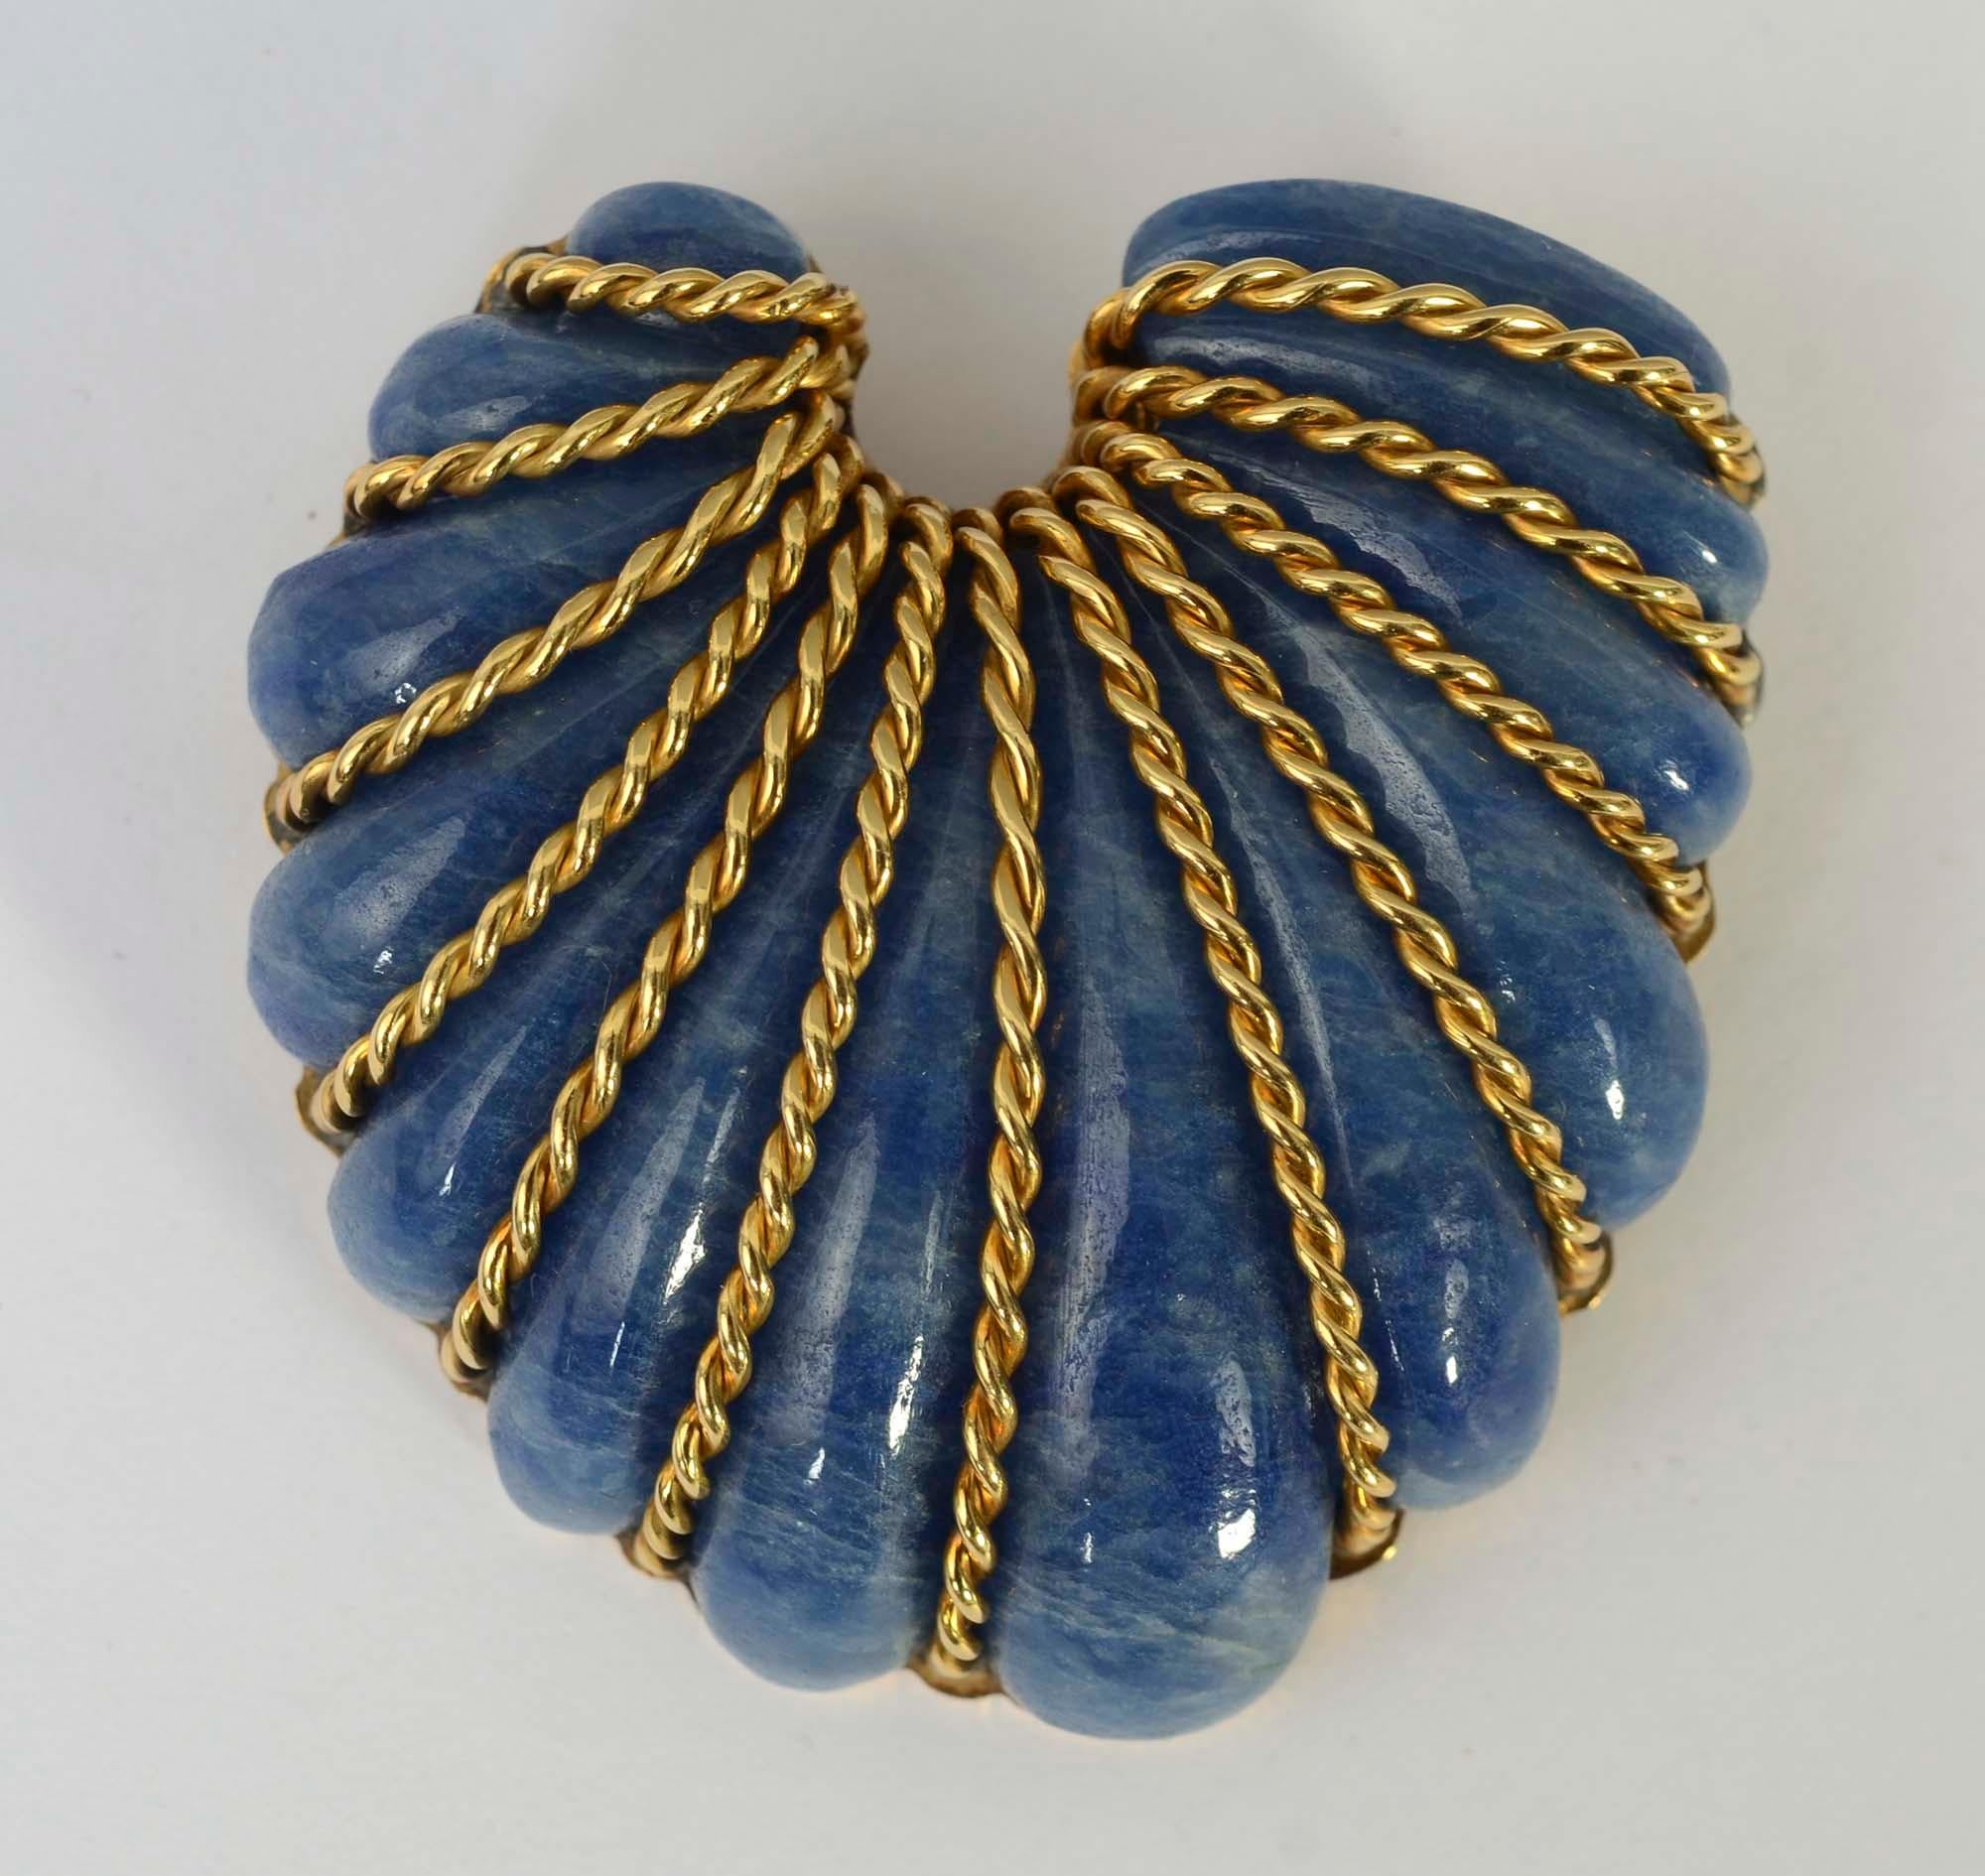 Seaman Schepps beautifully carved sodalite seashell brooch banded with 18 karat gold. The thirteen lobes of the shell are separated by twisted gold bands. The brooch measures 2 inches wide and 2 1/4 inches long.